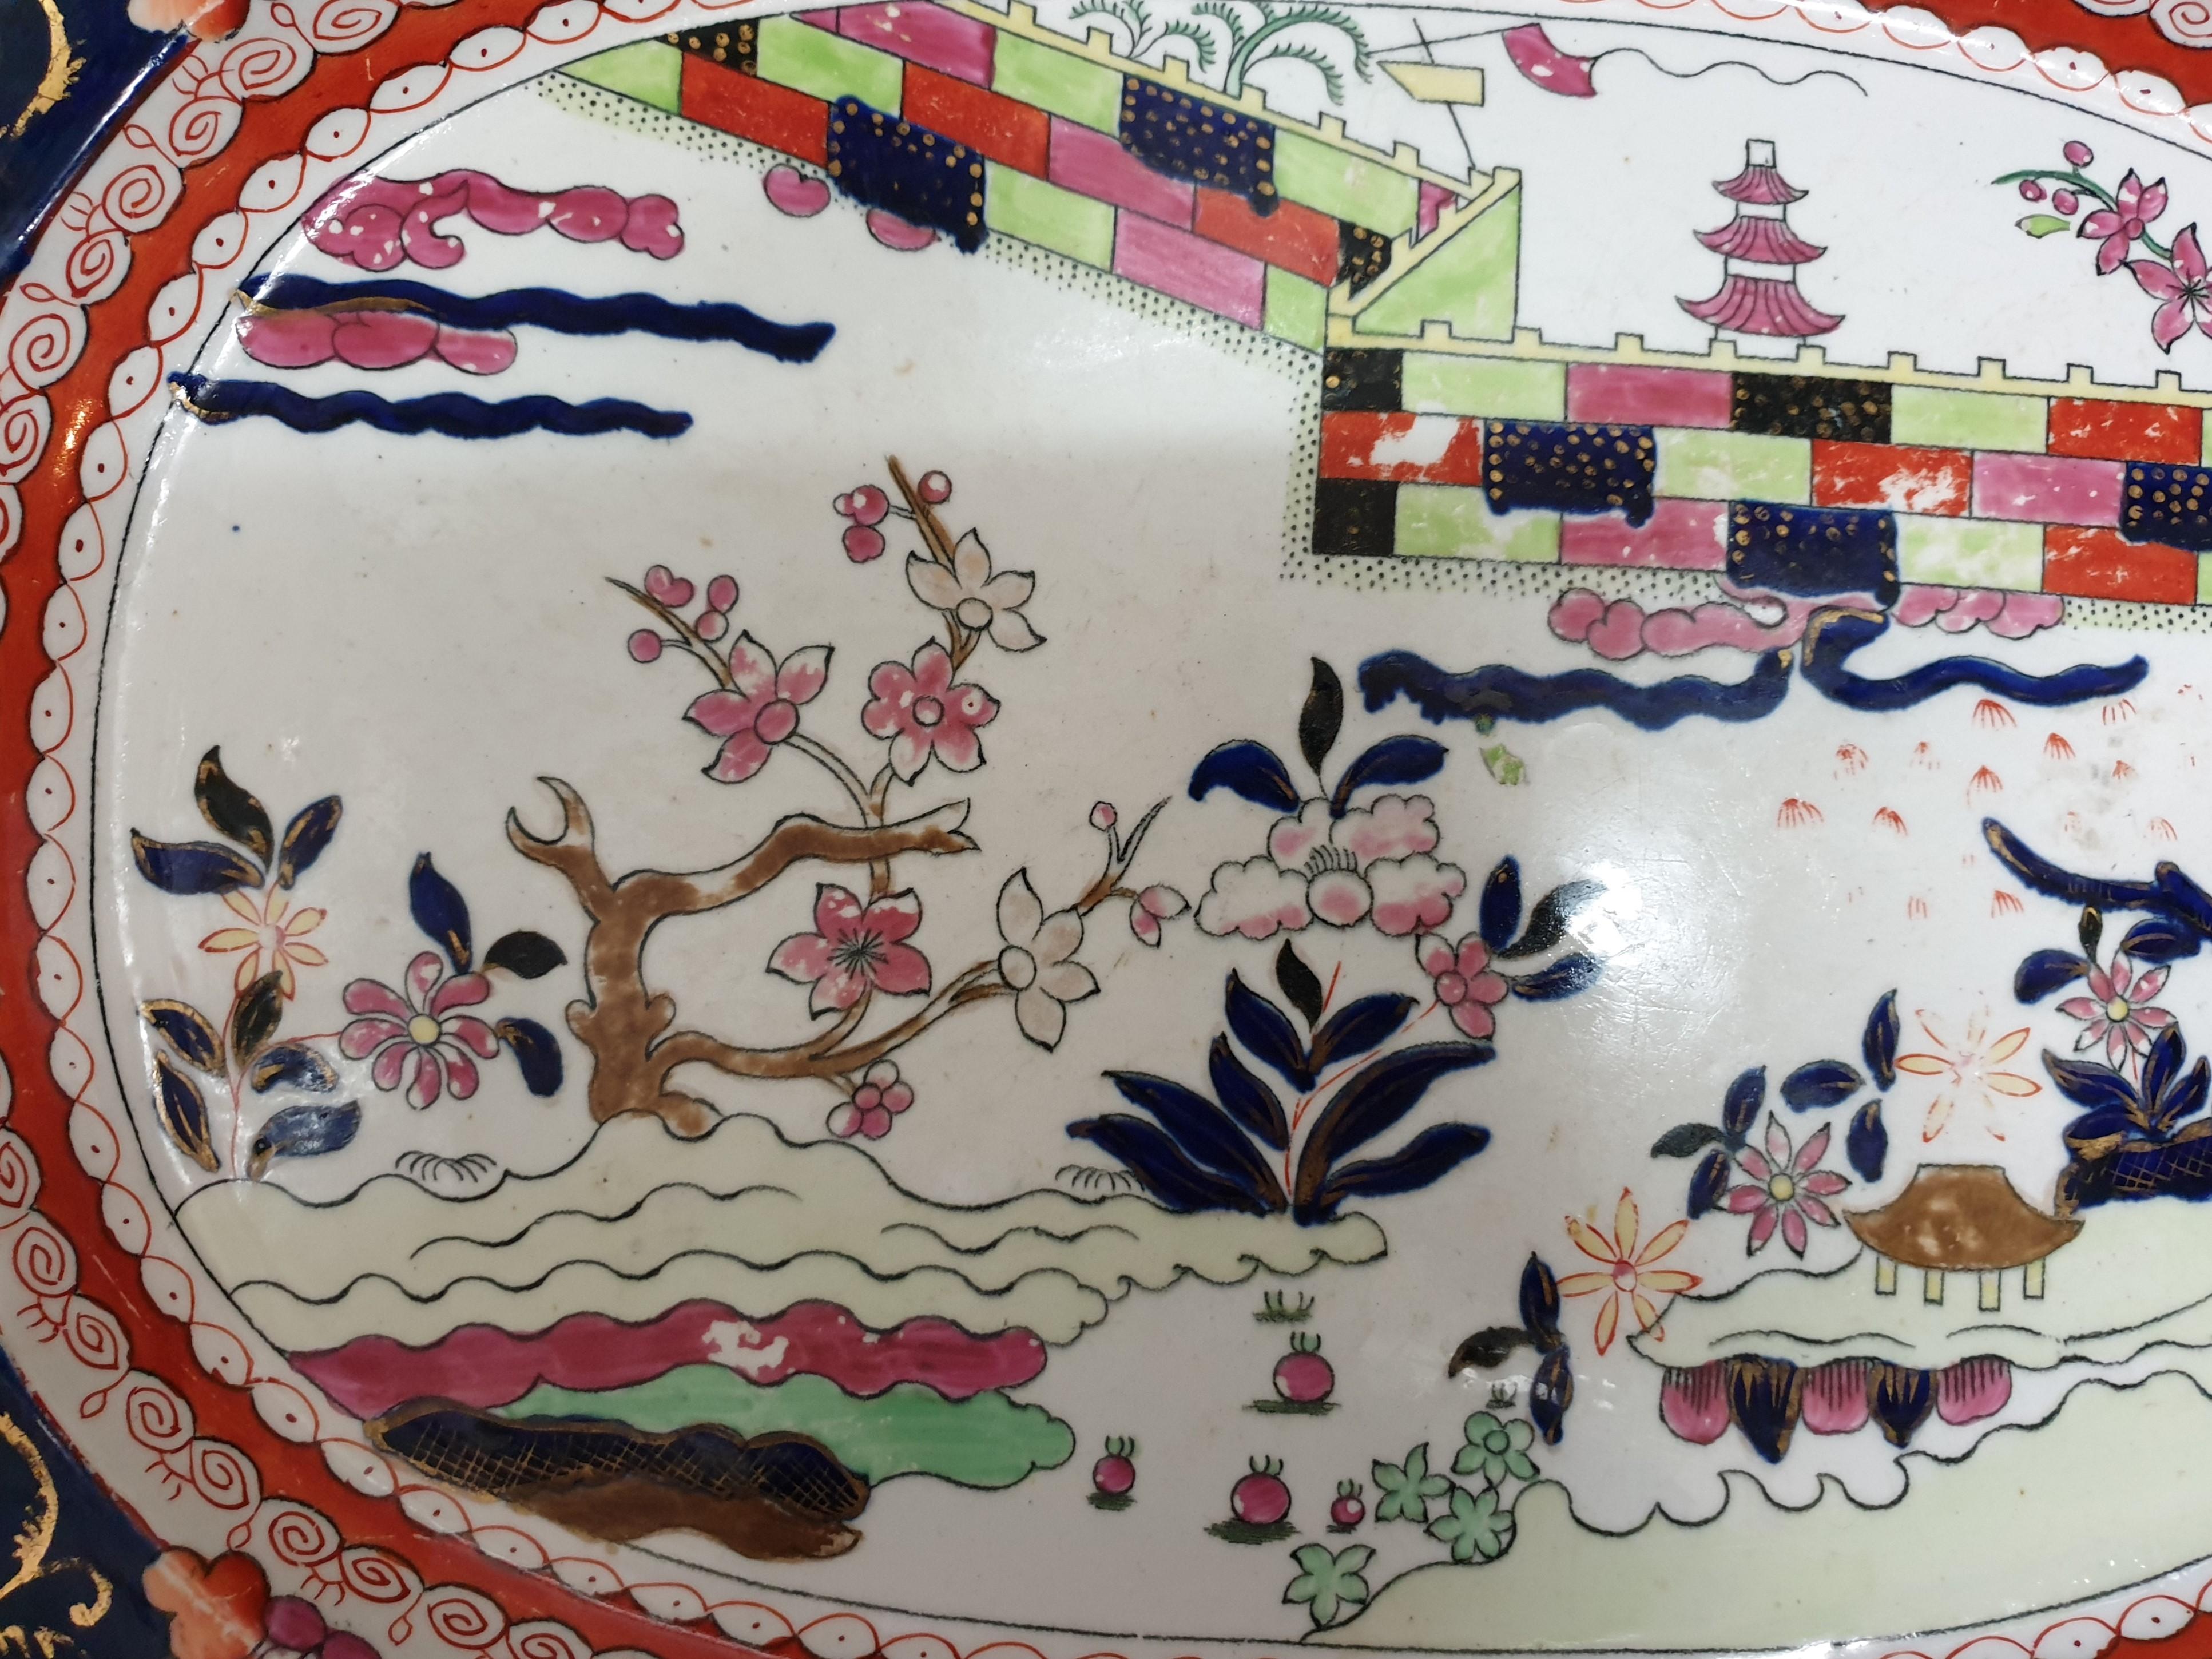 An fine and large early-19th century Mason’s patent ironstone Platter produced by Mason's Ironstone, England and dating to their earliest period, circa 1815 to 1820's .
It is beautifully hand decorated in a striking chinoiserie pattern called